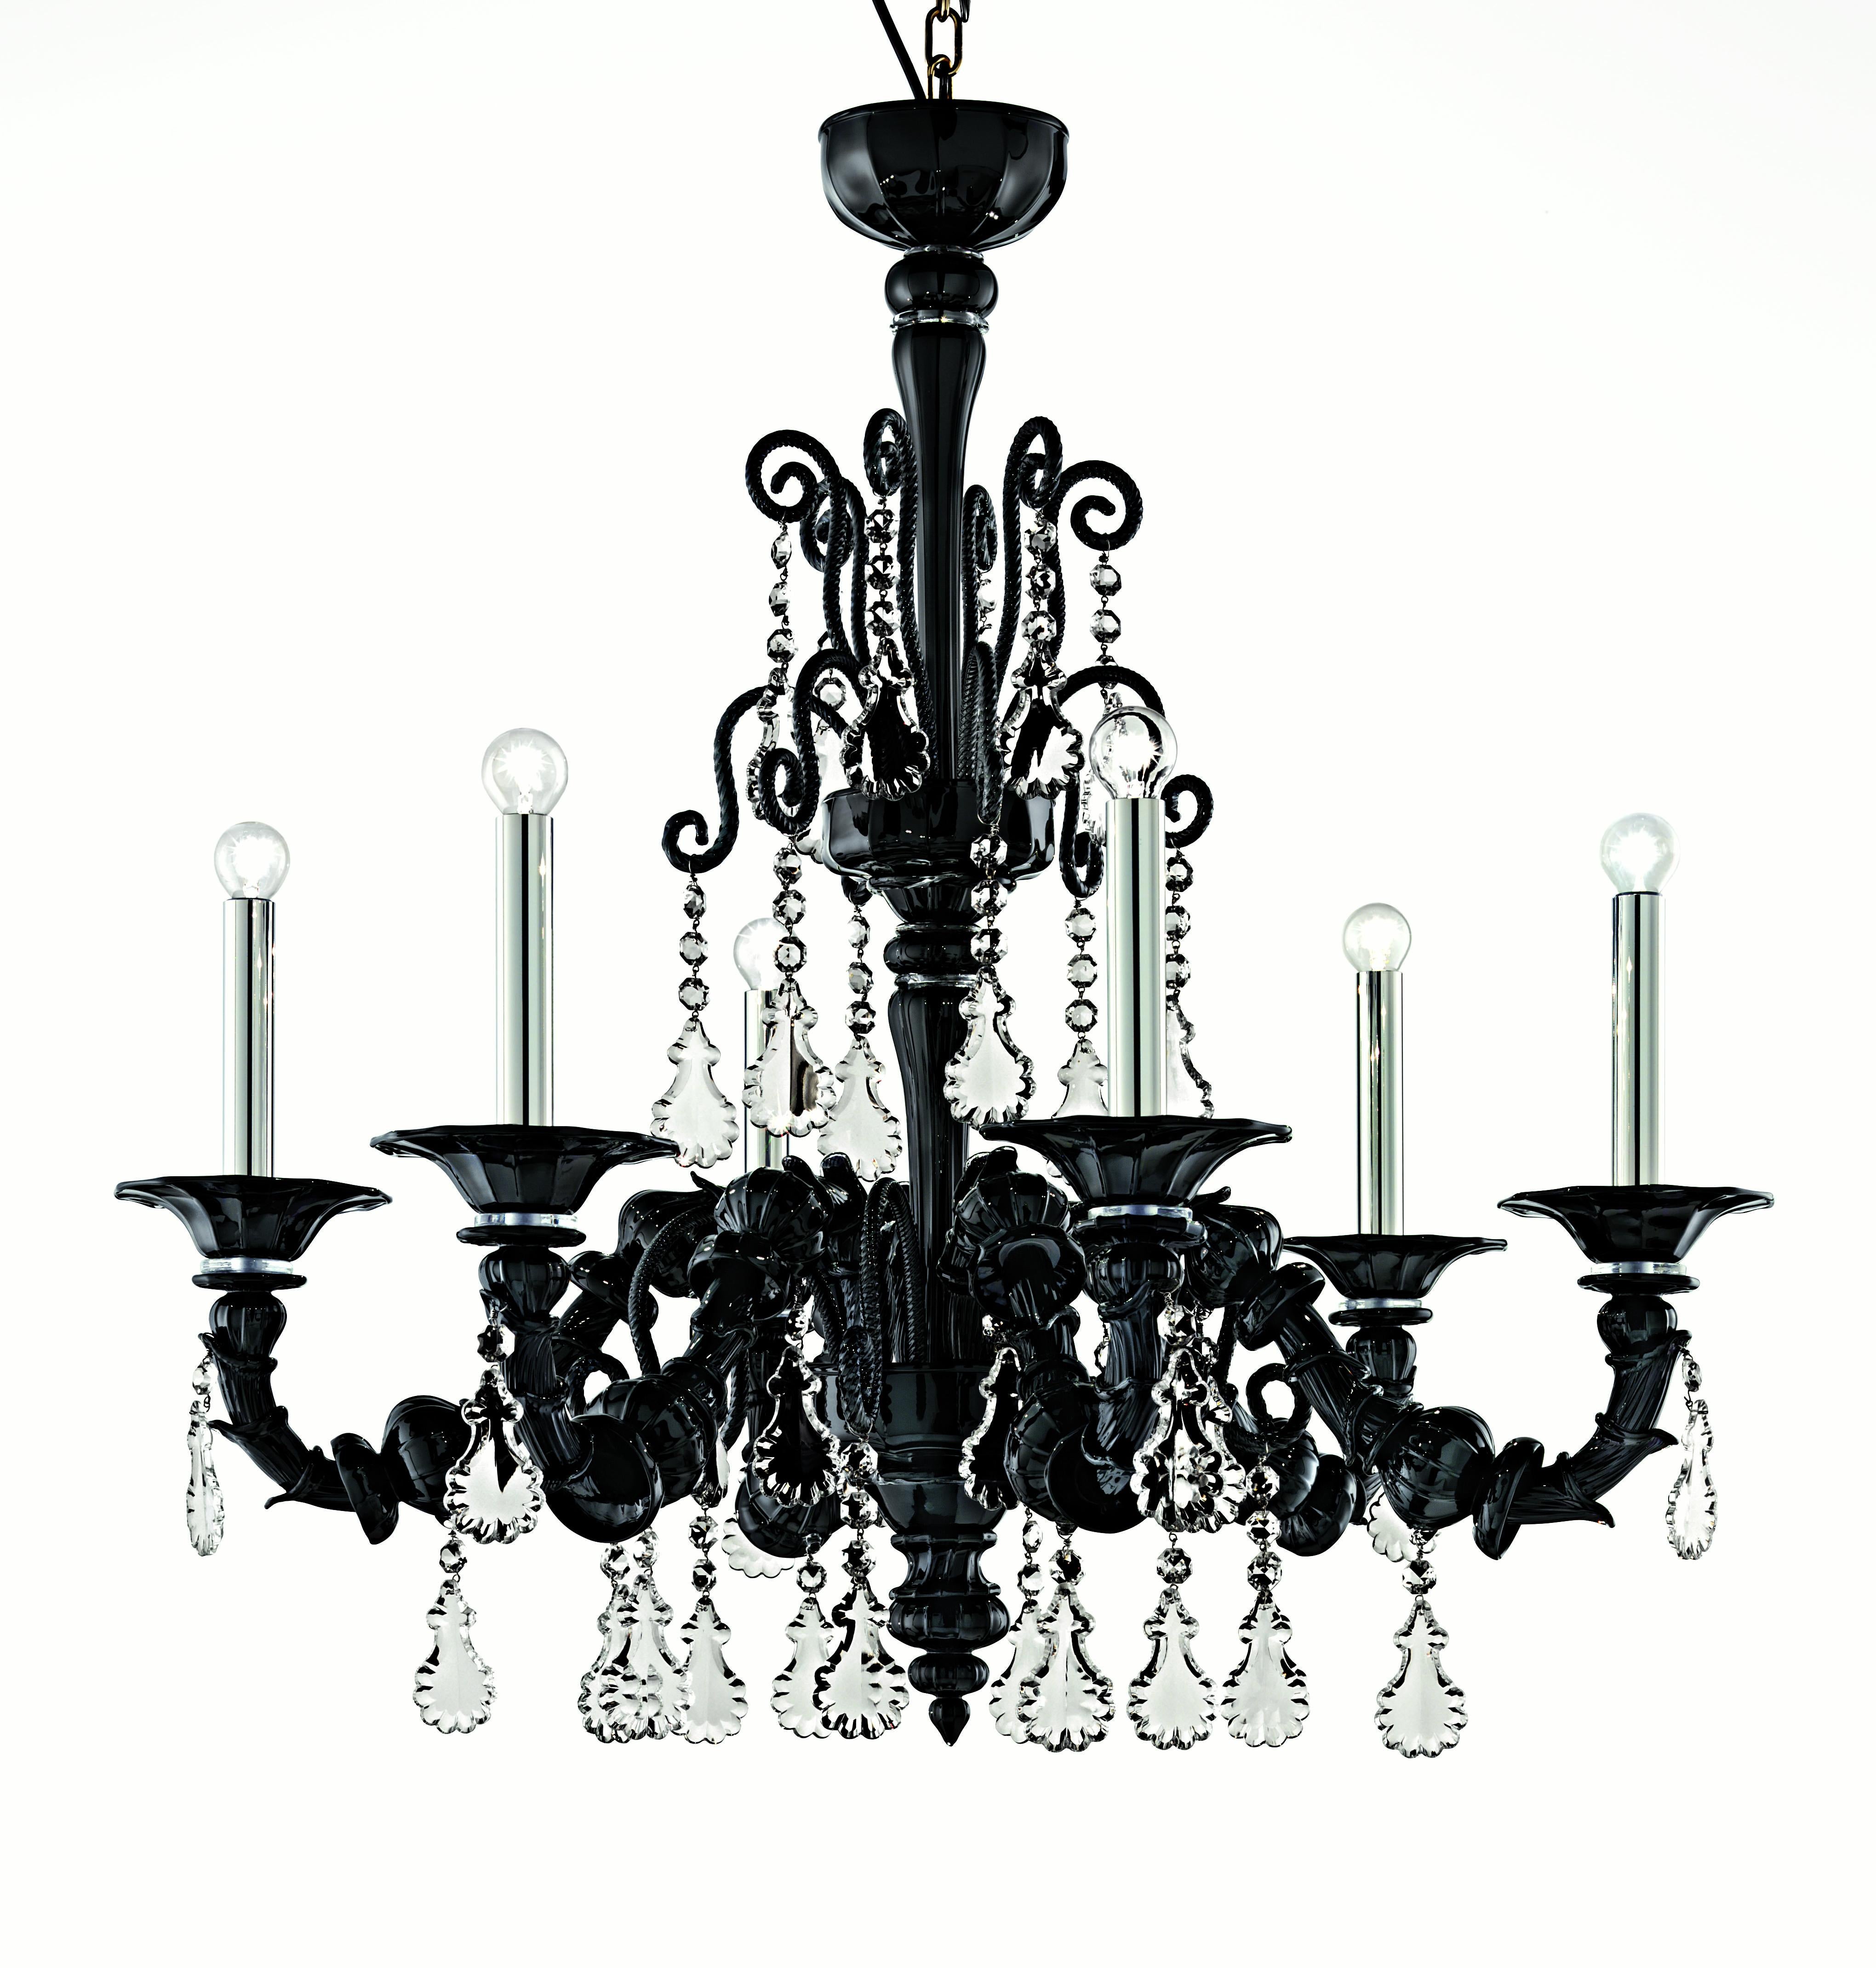 Black (Black_NN) Baikal 5560 06 Chandelier in Glass & Polished Chrome Finish, by Barovier&Toso 2